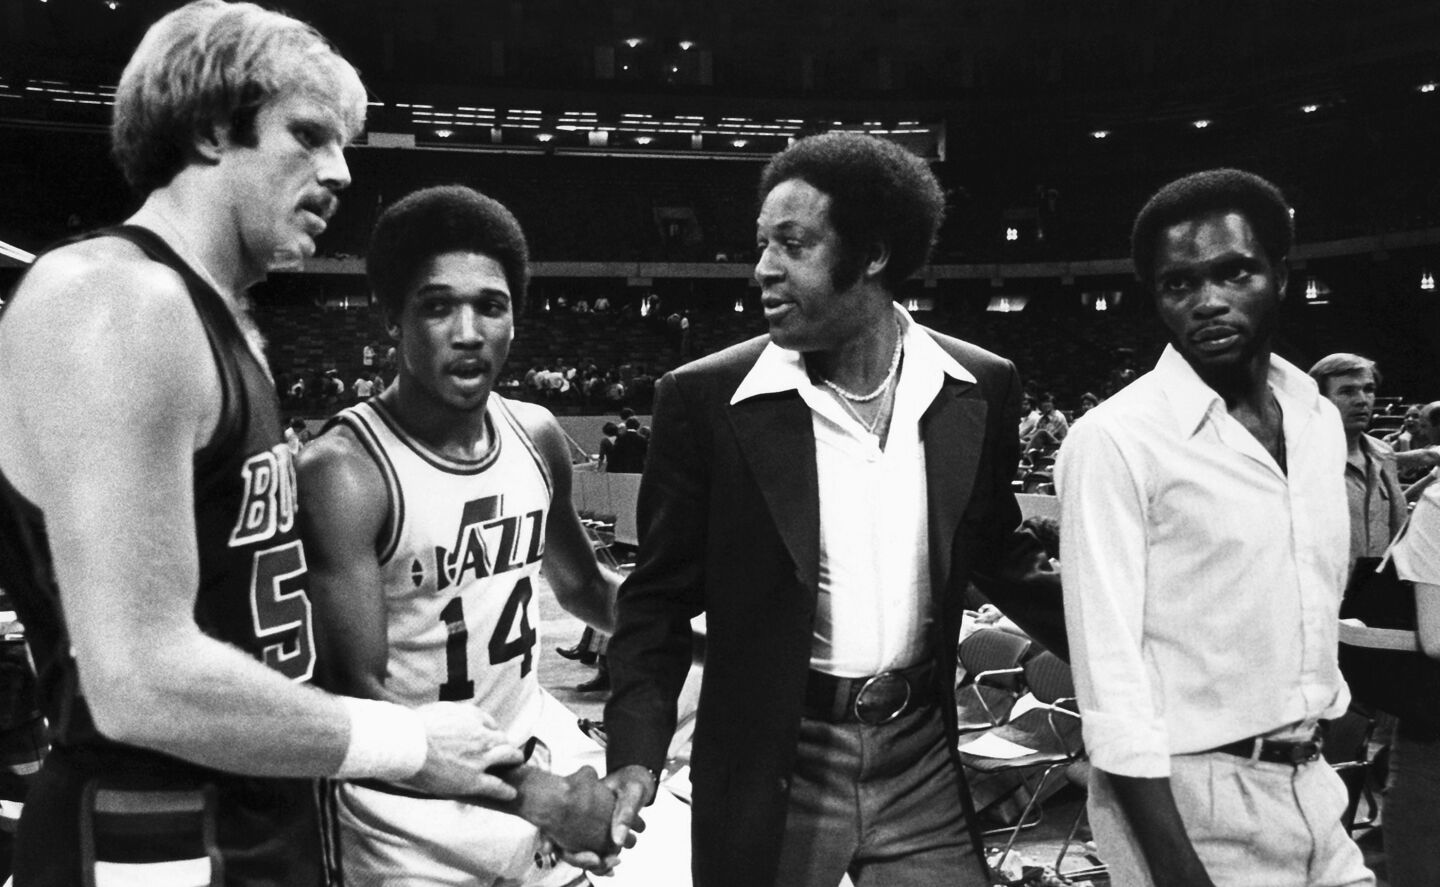 New Orleans Jazz Coach Elgin Baylor (in coat) shakes with, from left, Kent Benson of the Milwaukee Bucks, Tommy Green of the Jazz and Jimmy McElroy of the Jazz, who did not dress out for the Jazz-Bucks game in the Louisiana Superdome in New Orleans April 7, 1979.